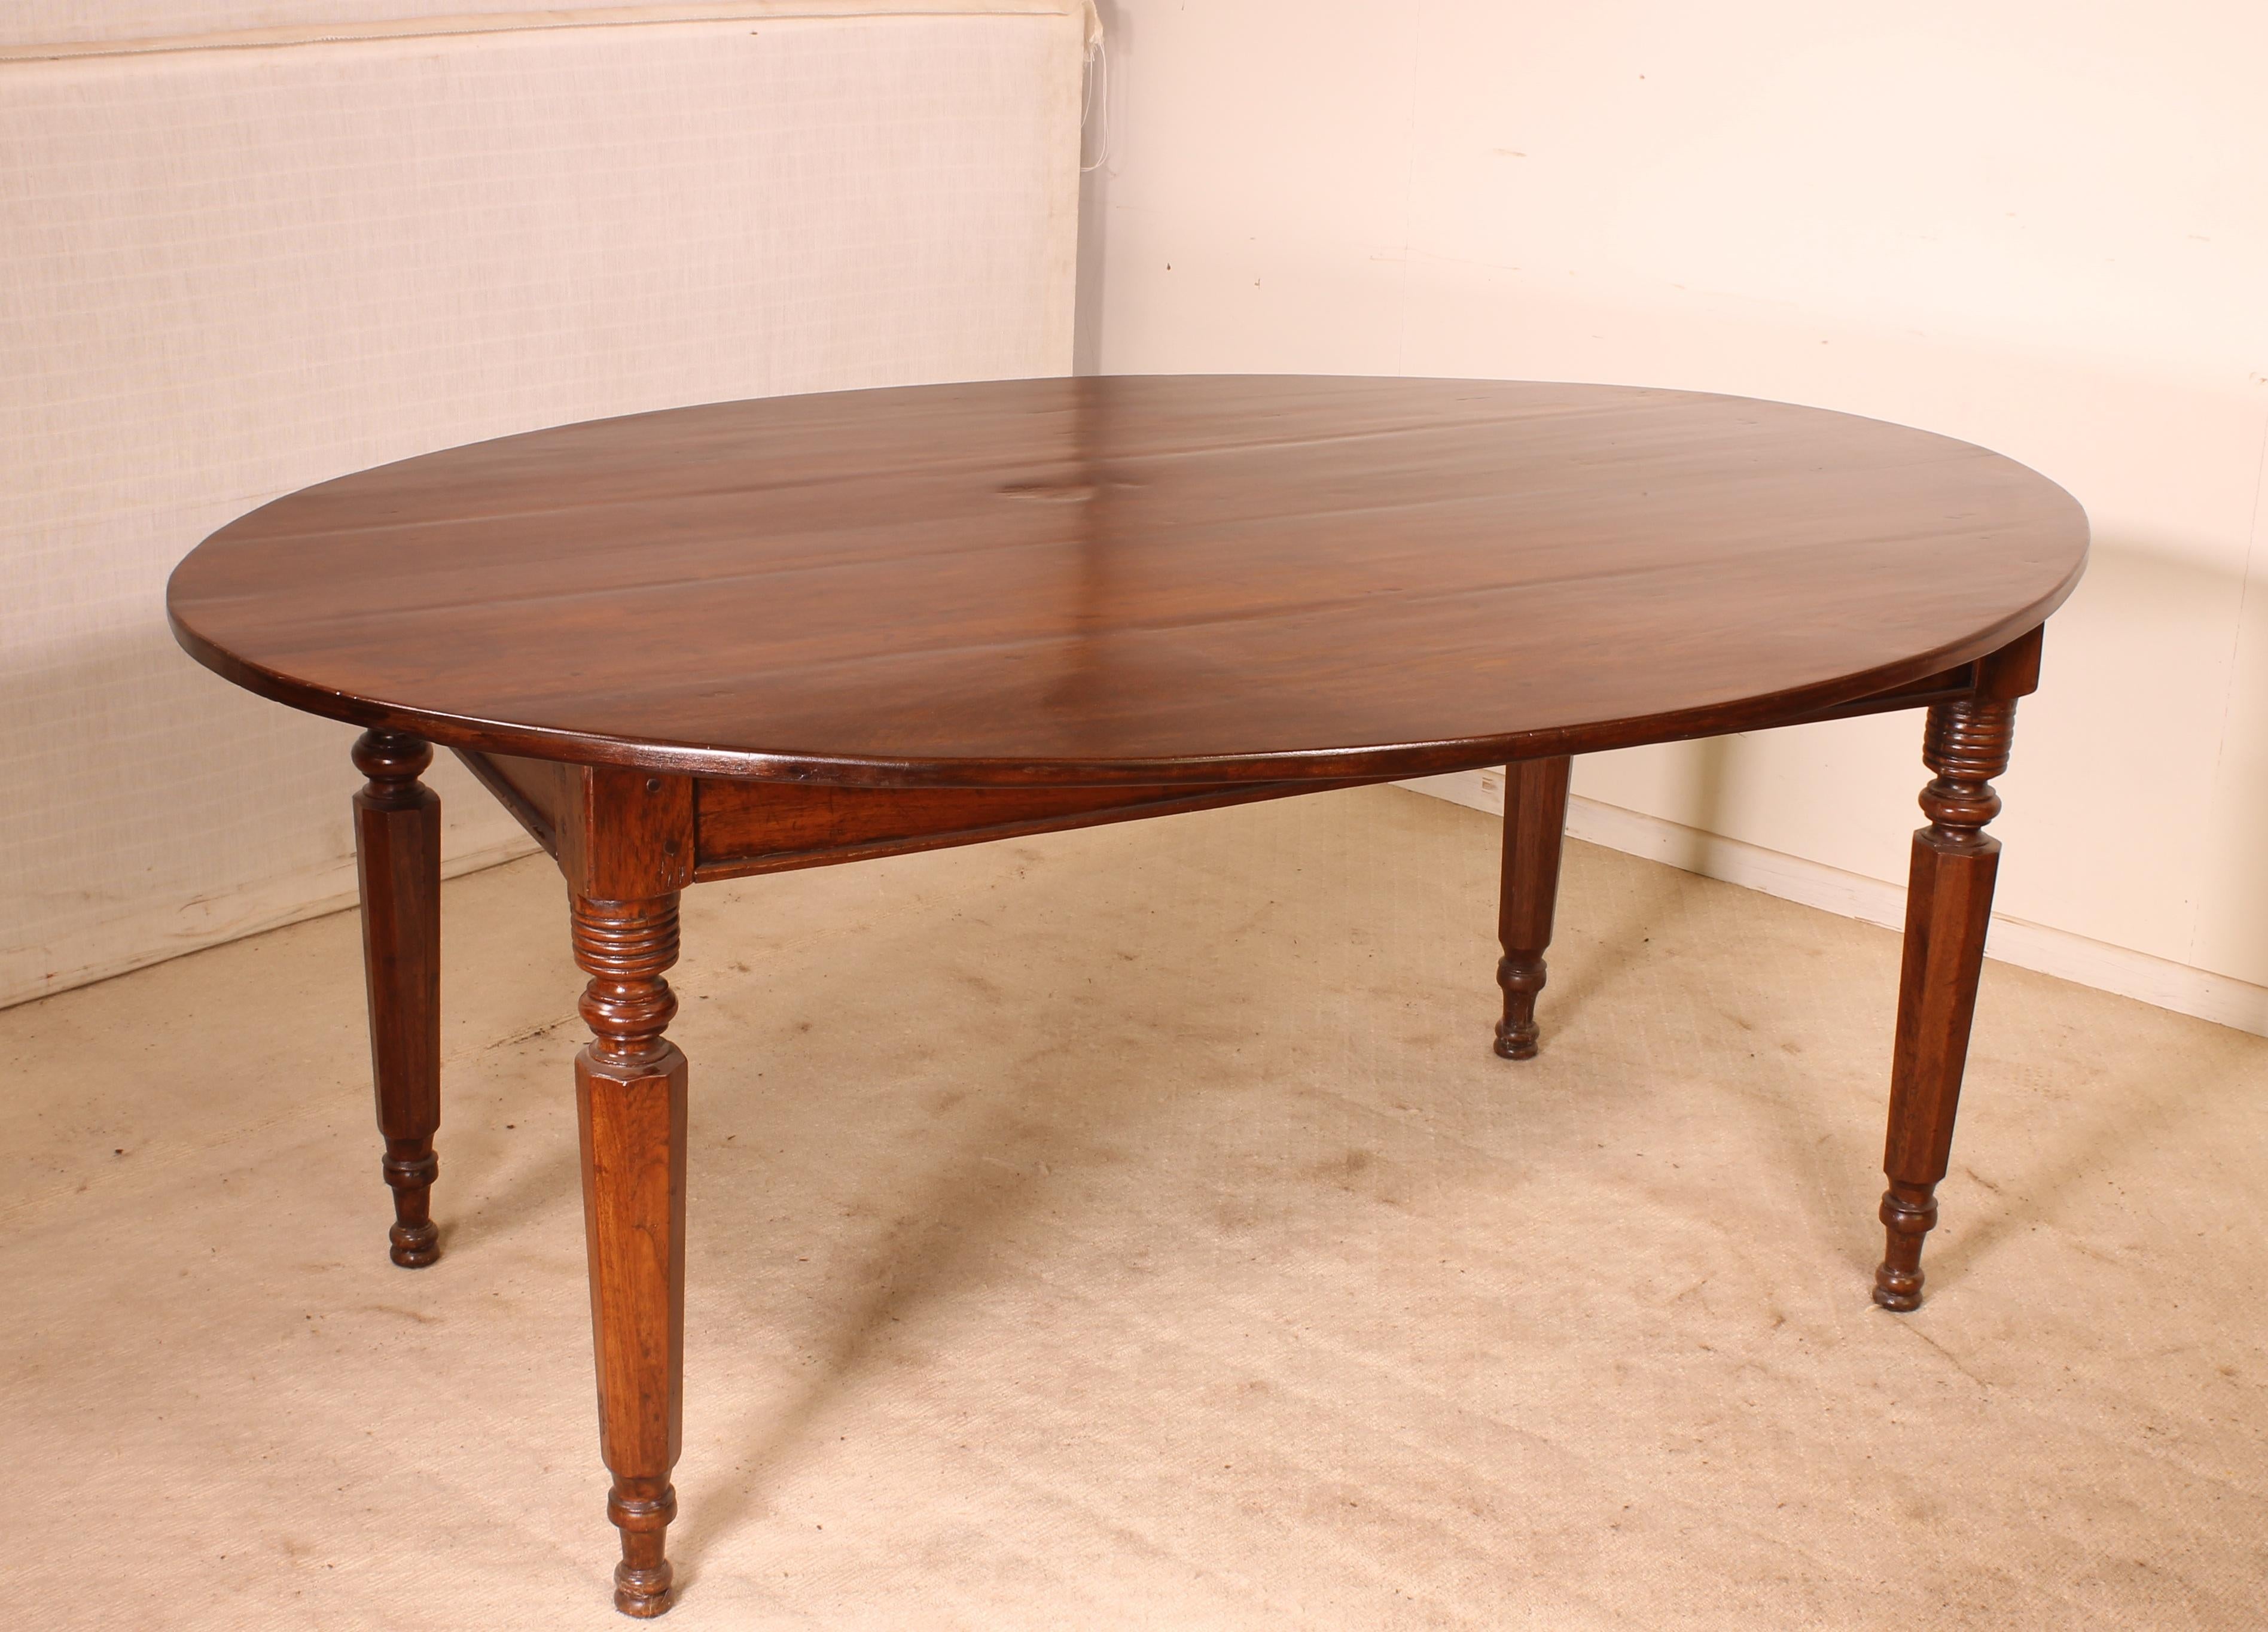 A fine 19th century farmhouse table of elliptical shape
Very nice table that has an unusual shape, which allows the seating of 10 people while keeping a size not too big.

The table has a beautiful patina and is in colonial wood.
Beautiful table